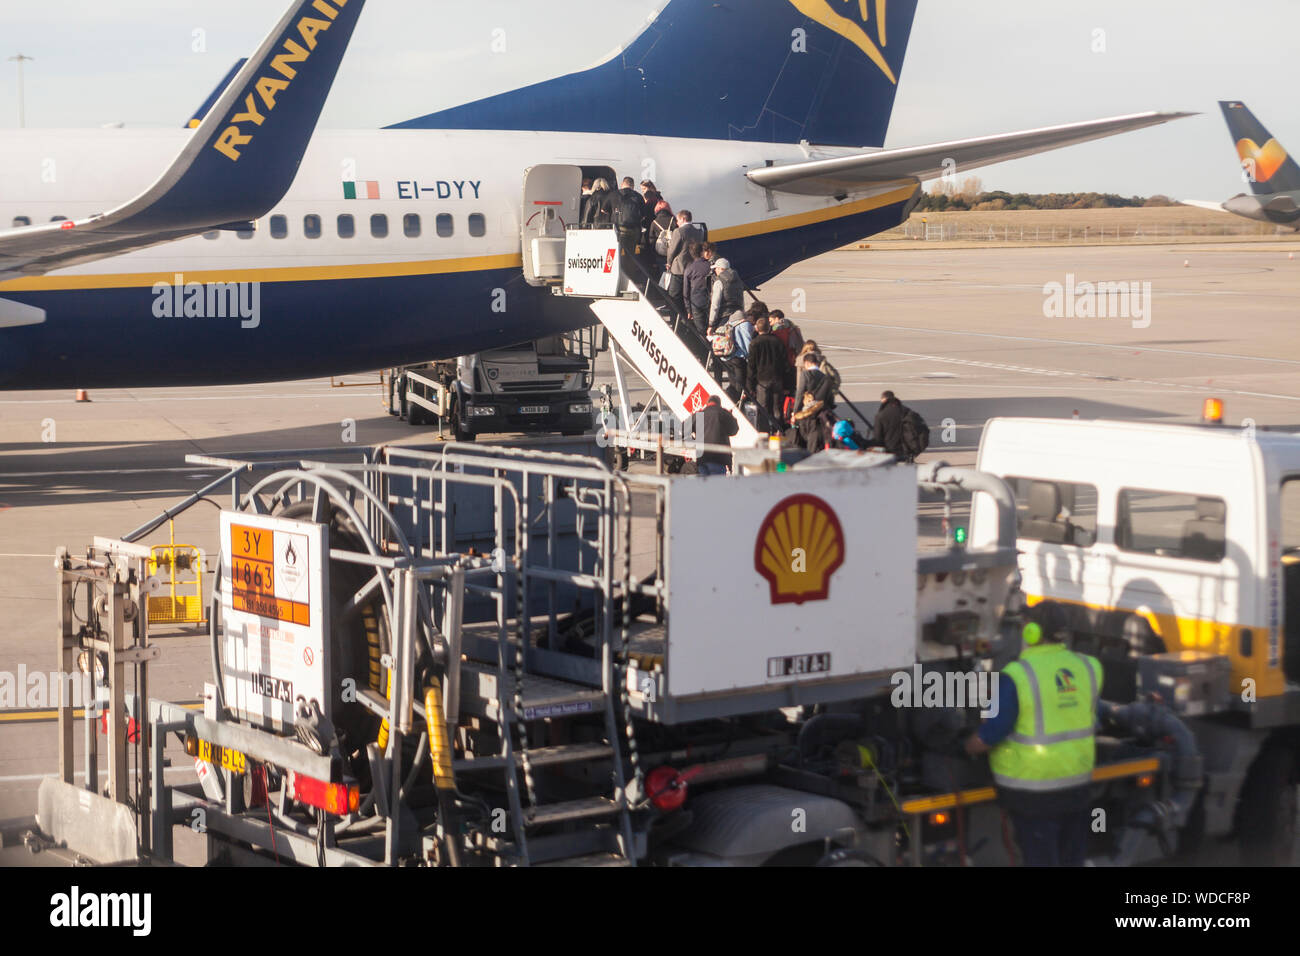 Passengers board a Ryanair plane at Stansted Airport, London, UK. Stock Photo